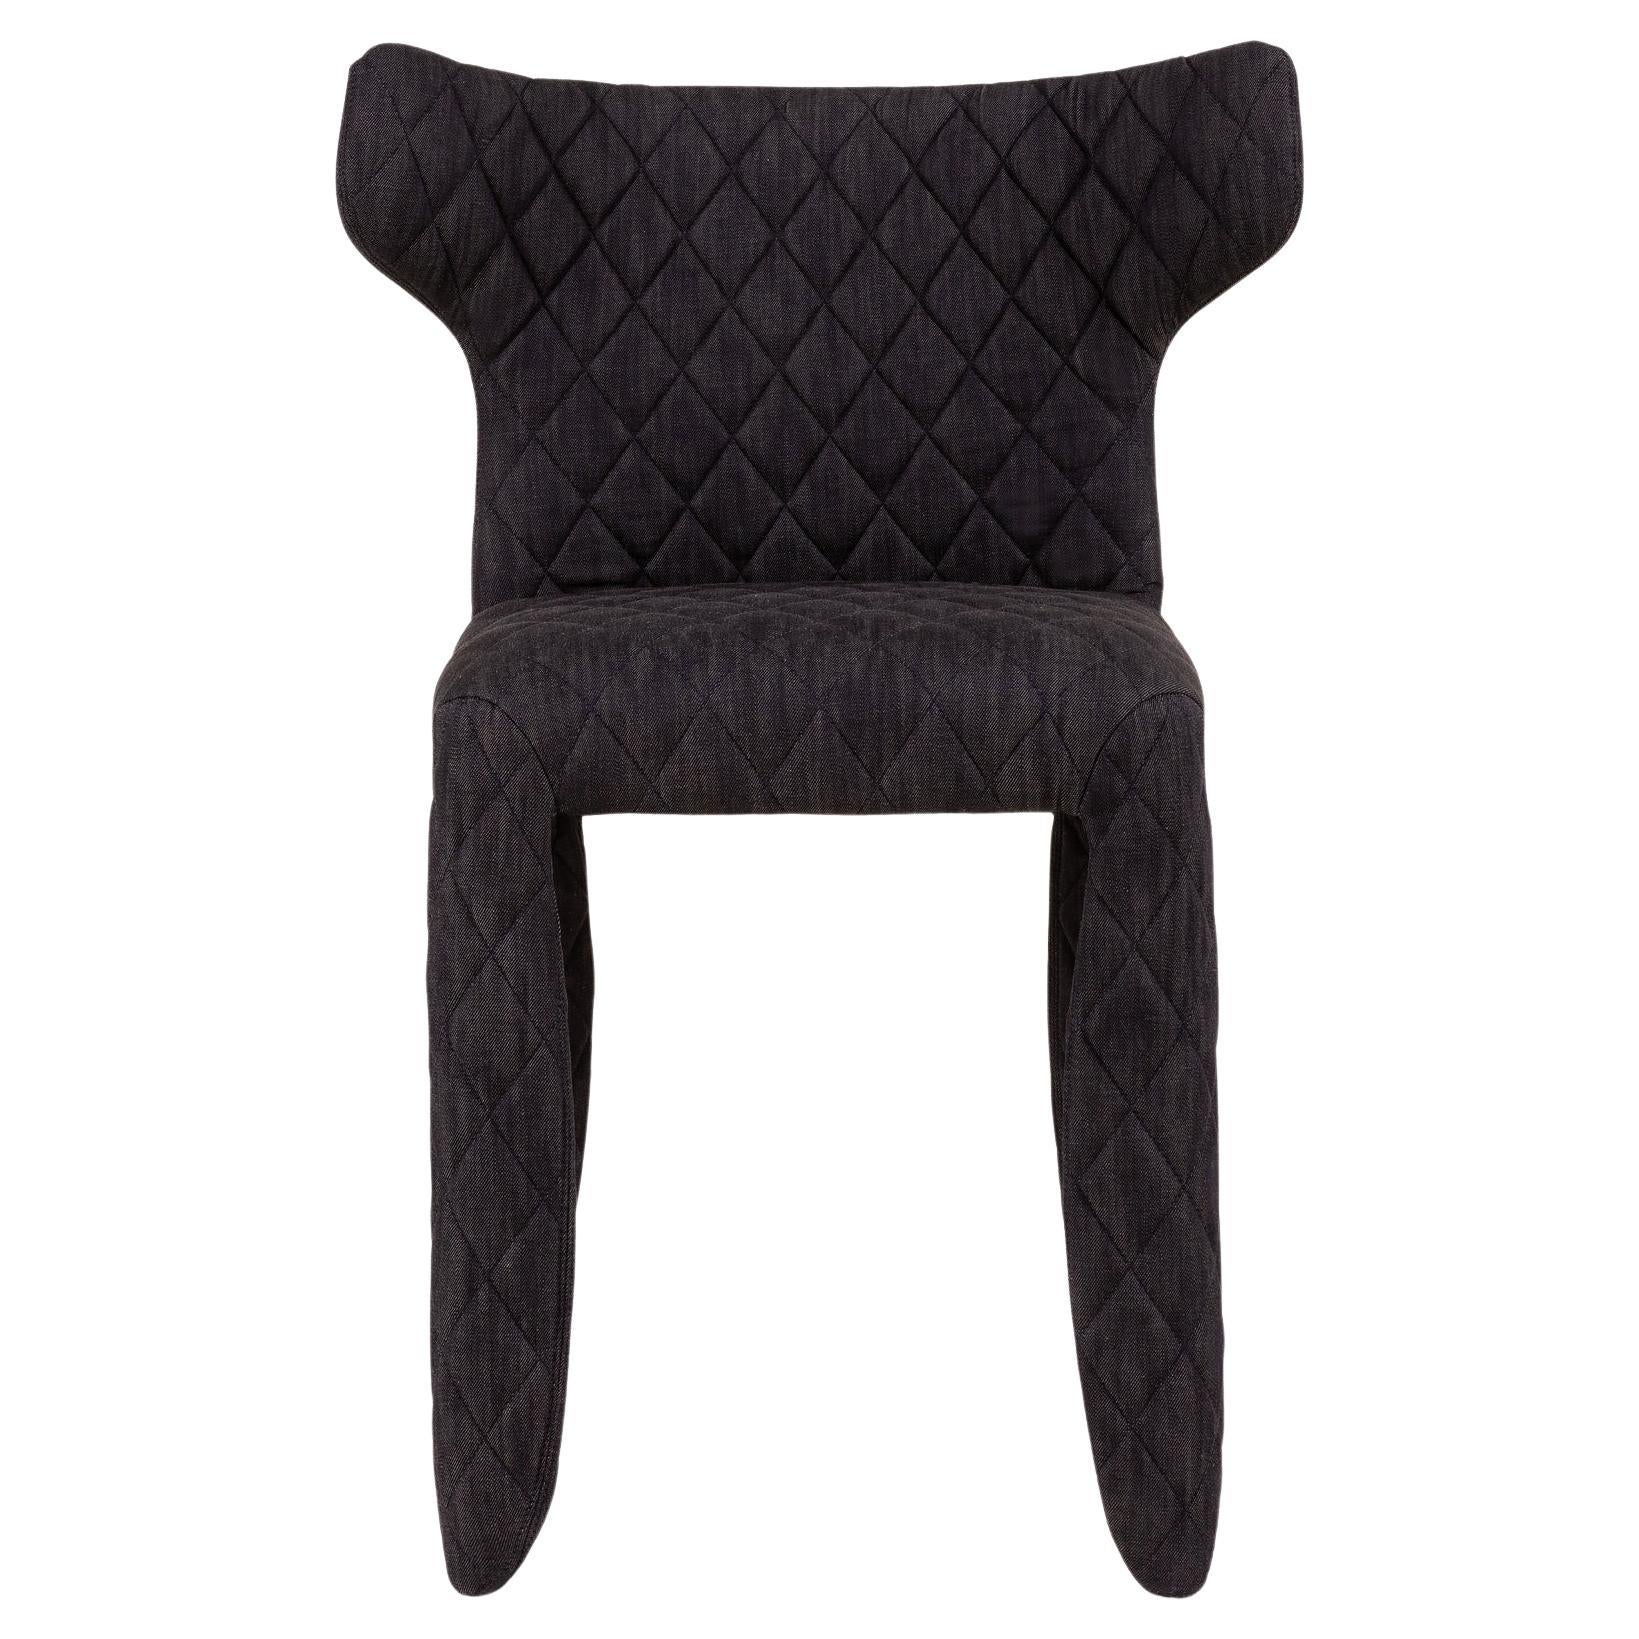 Moooi Monster Diamond Chair with Arms in Denim Midnight Black Upholstery